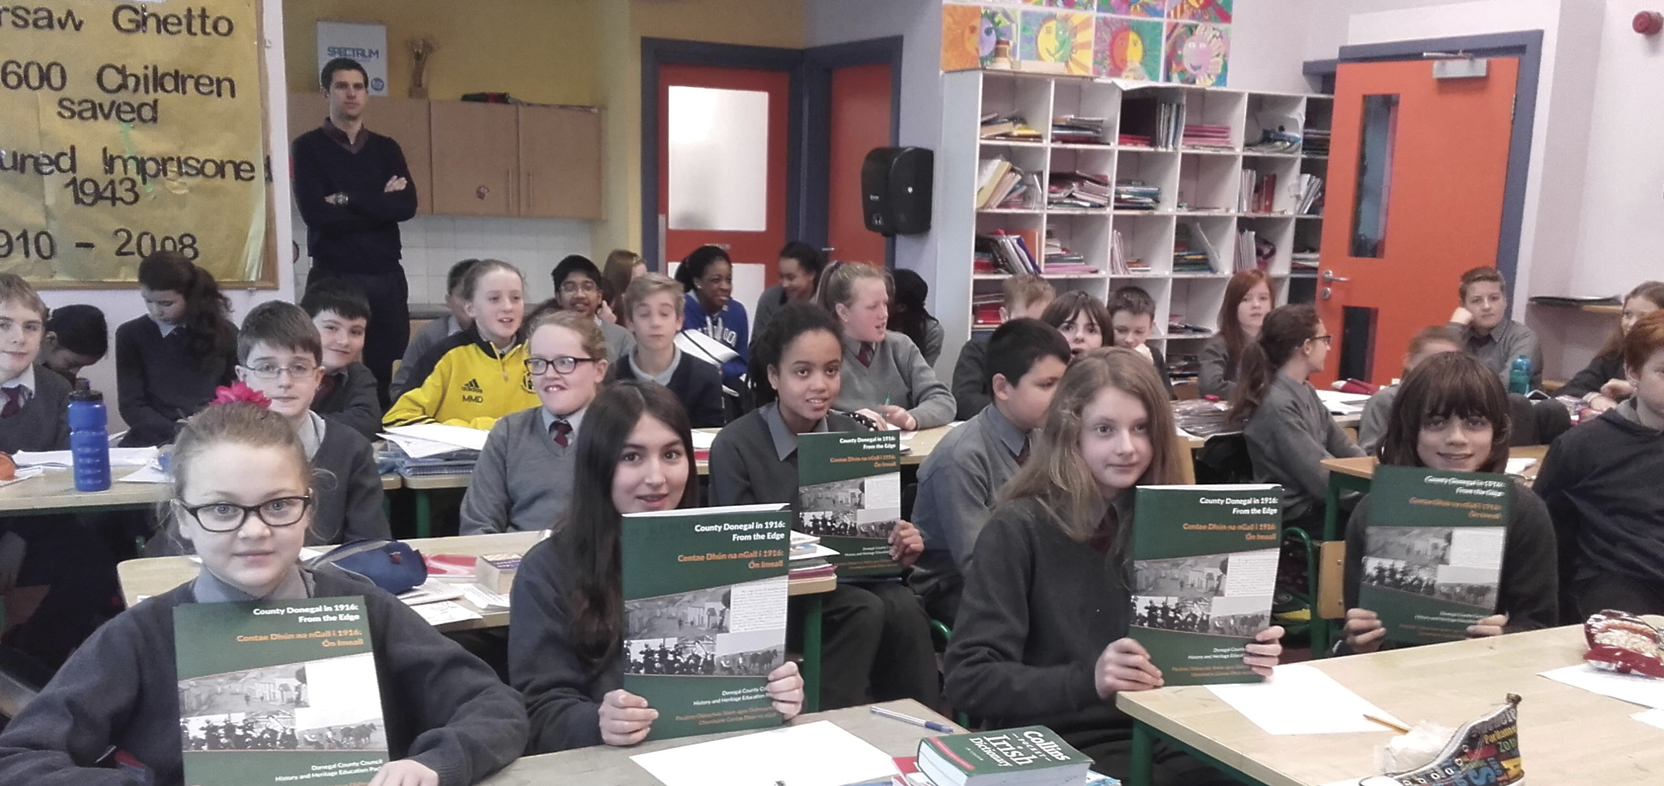 Children from  Illistrin National School receive copies of County Donegal in 1916: From the Edge, History and Heritage Education Pack, February 2016. (Photo: Eileen Burgess)